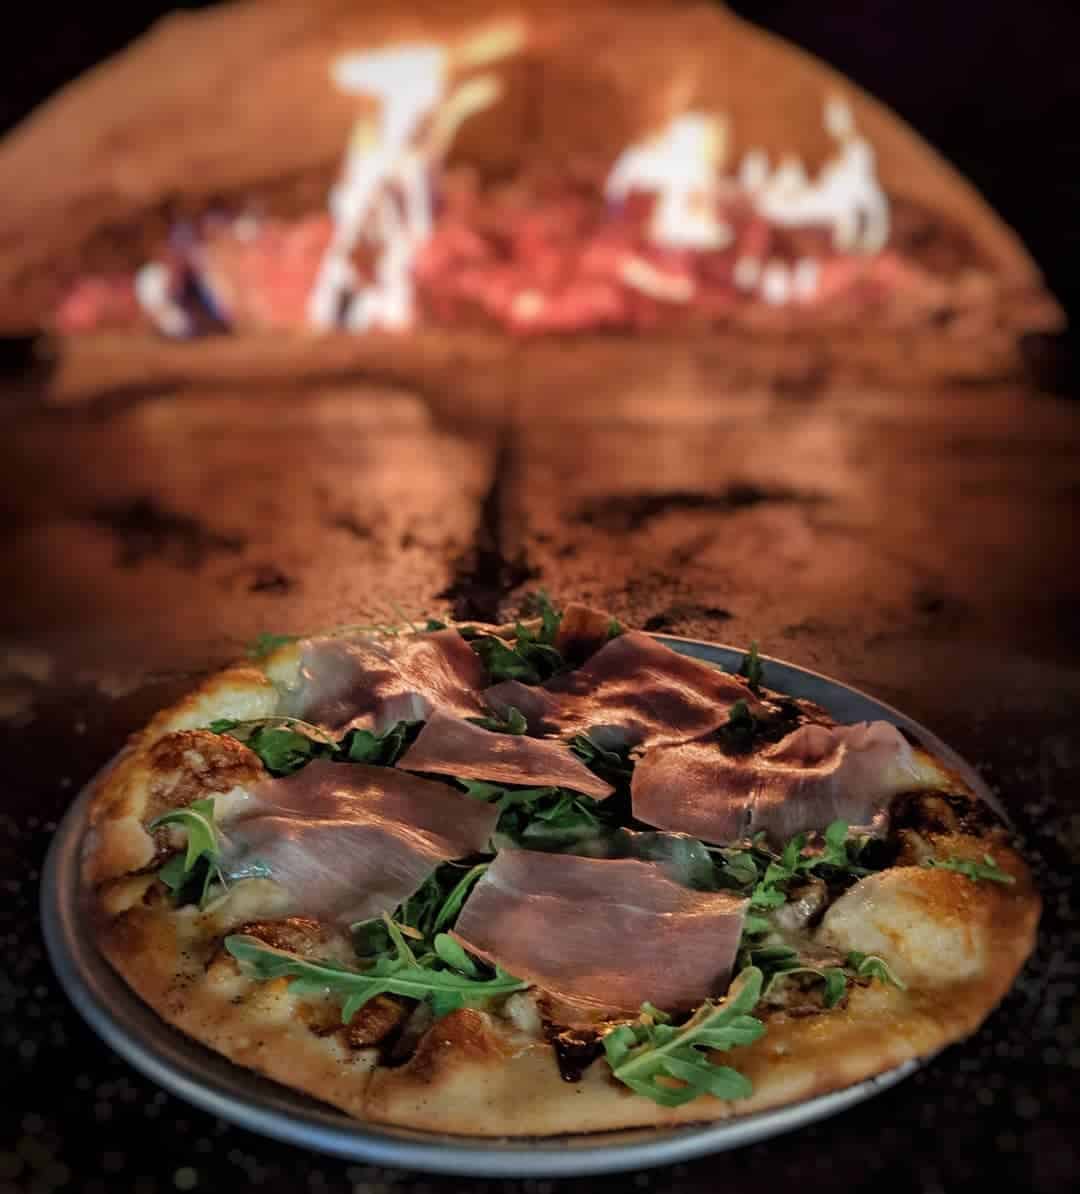 The Bench - Wood Fired Pizza with Oven